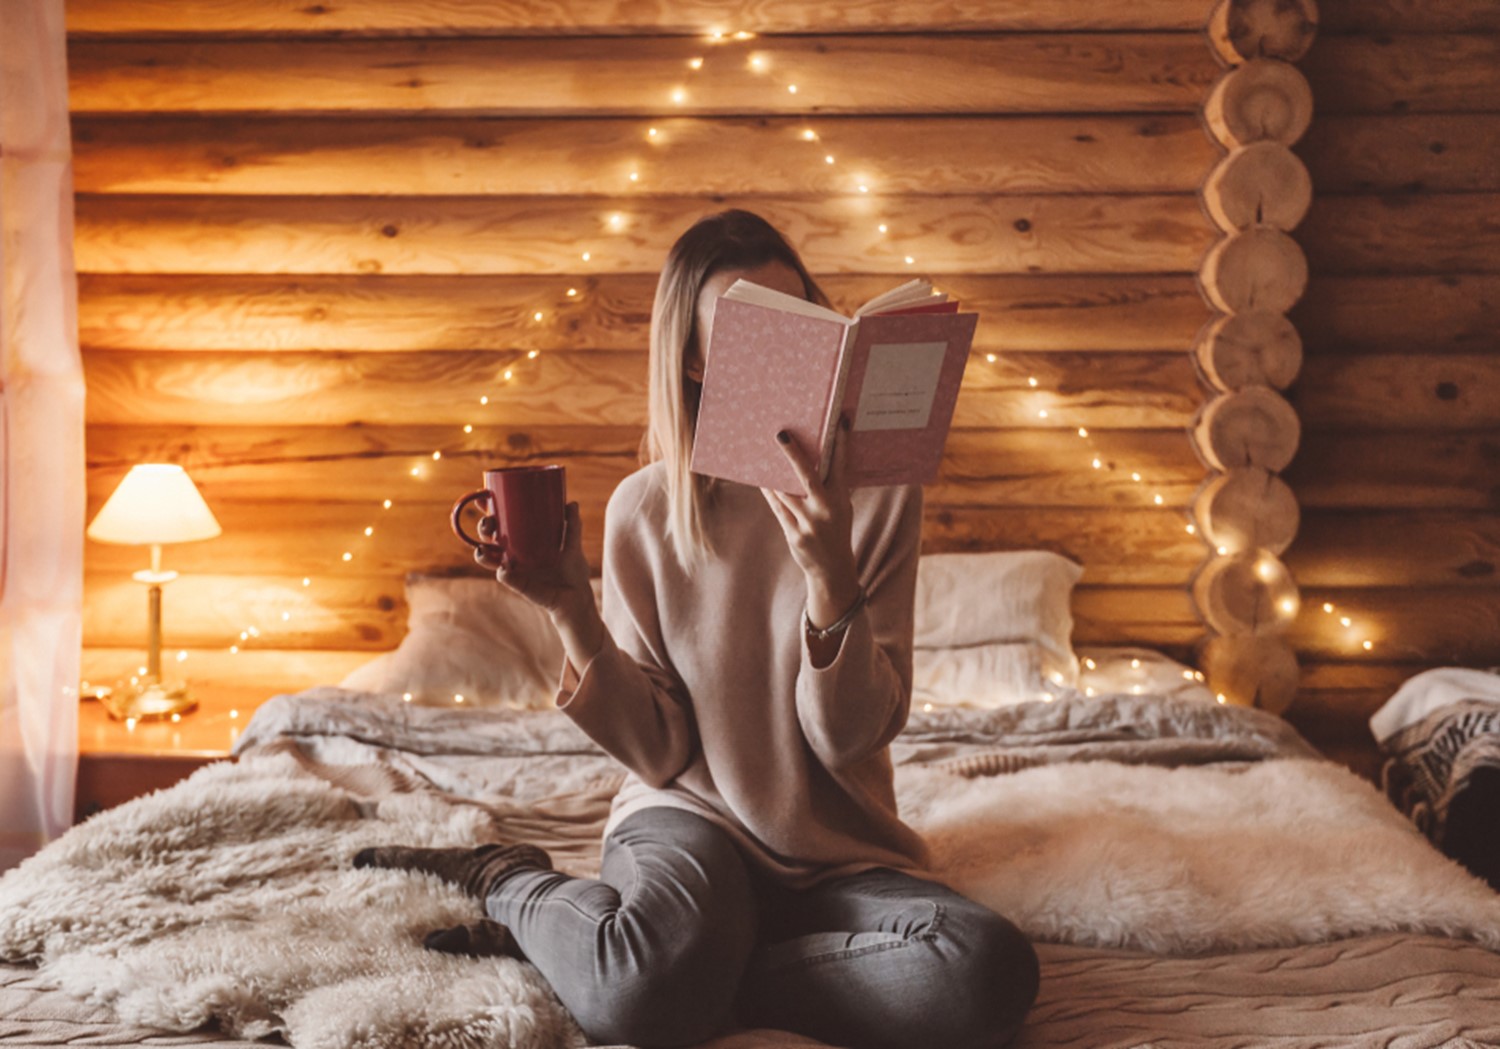 Hygge Lifestyle: Embracing Comfort and Coziness for Mental Health